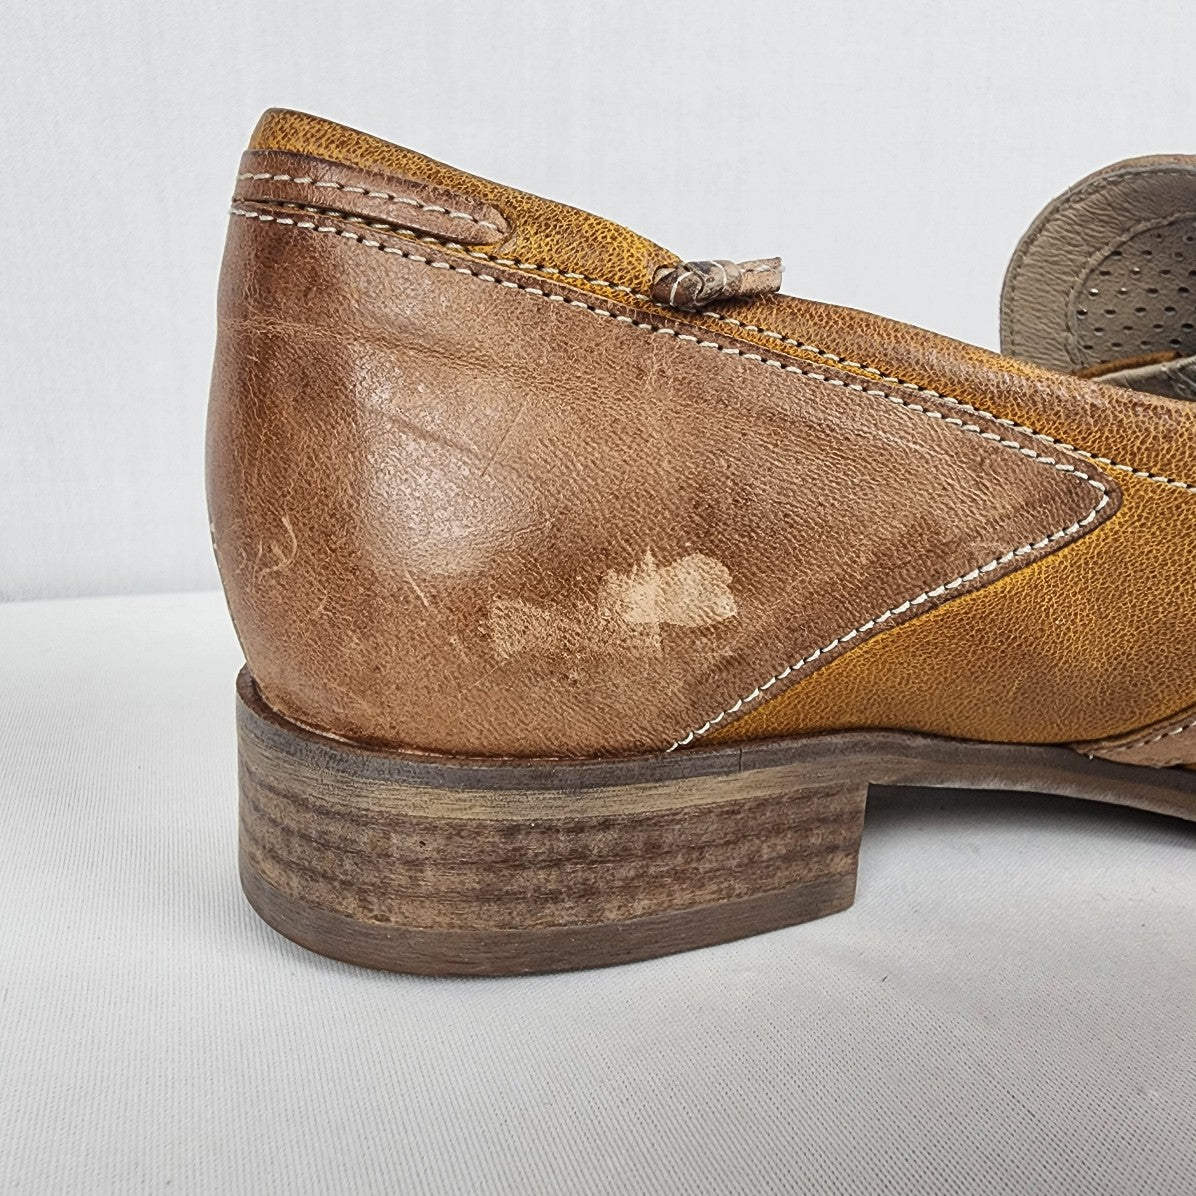 Casta Brown Leather Laser Cut Loafers Size 8.5